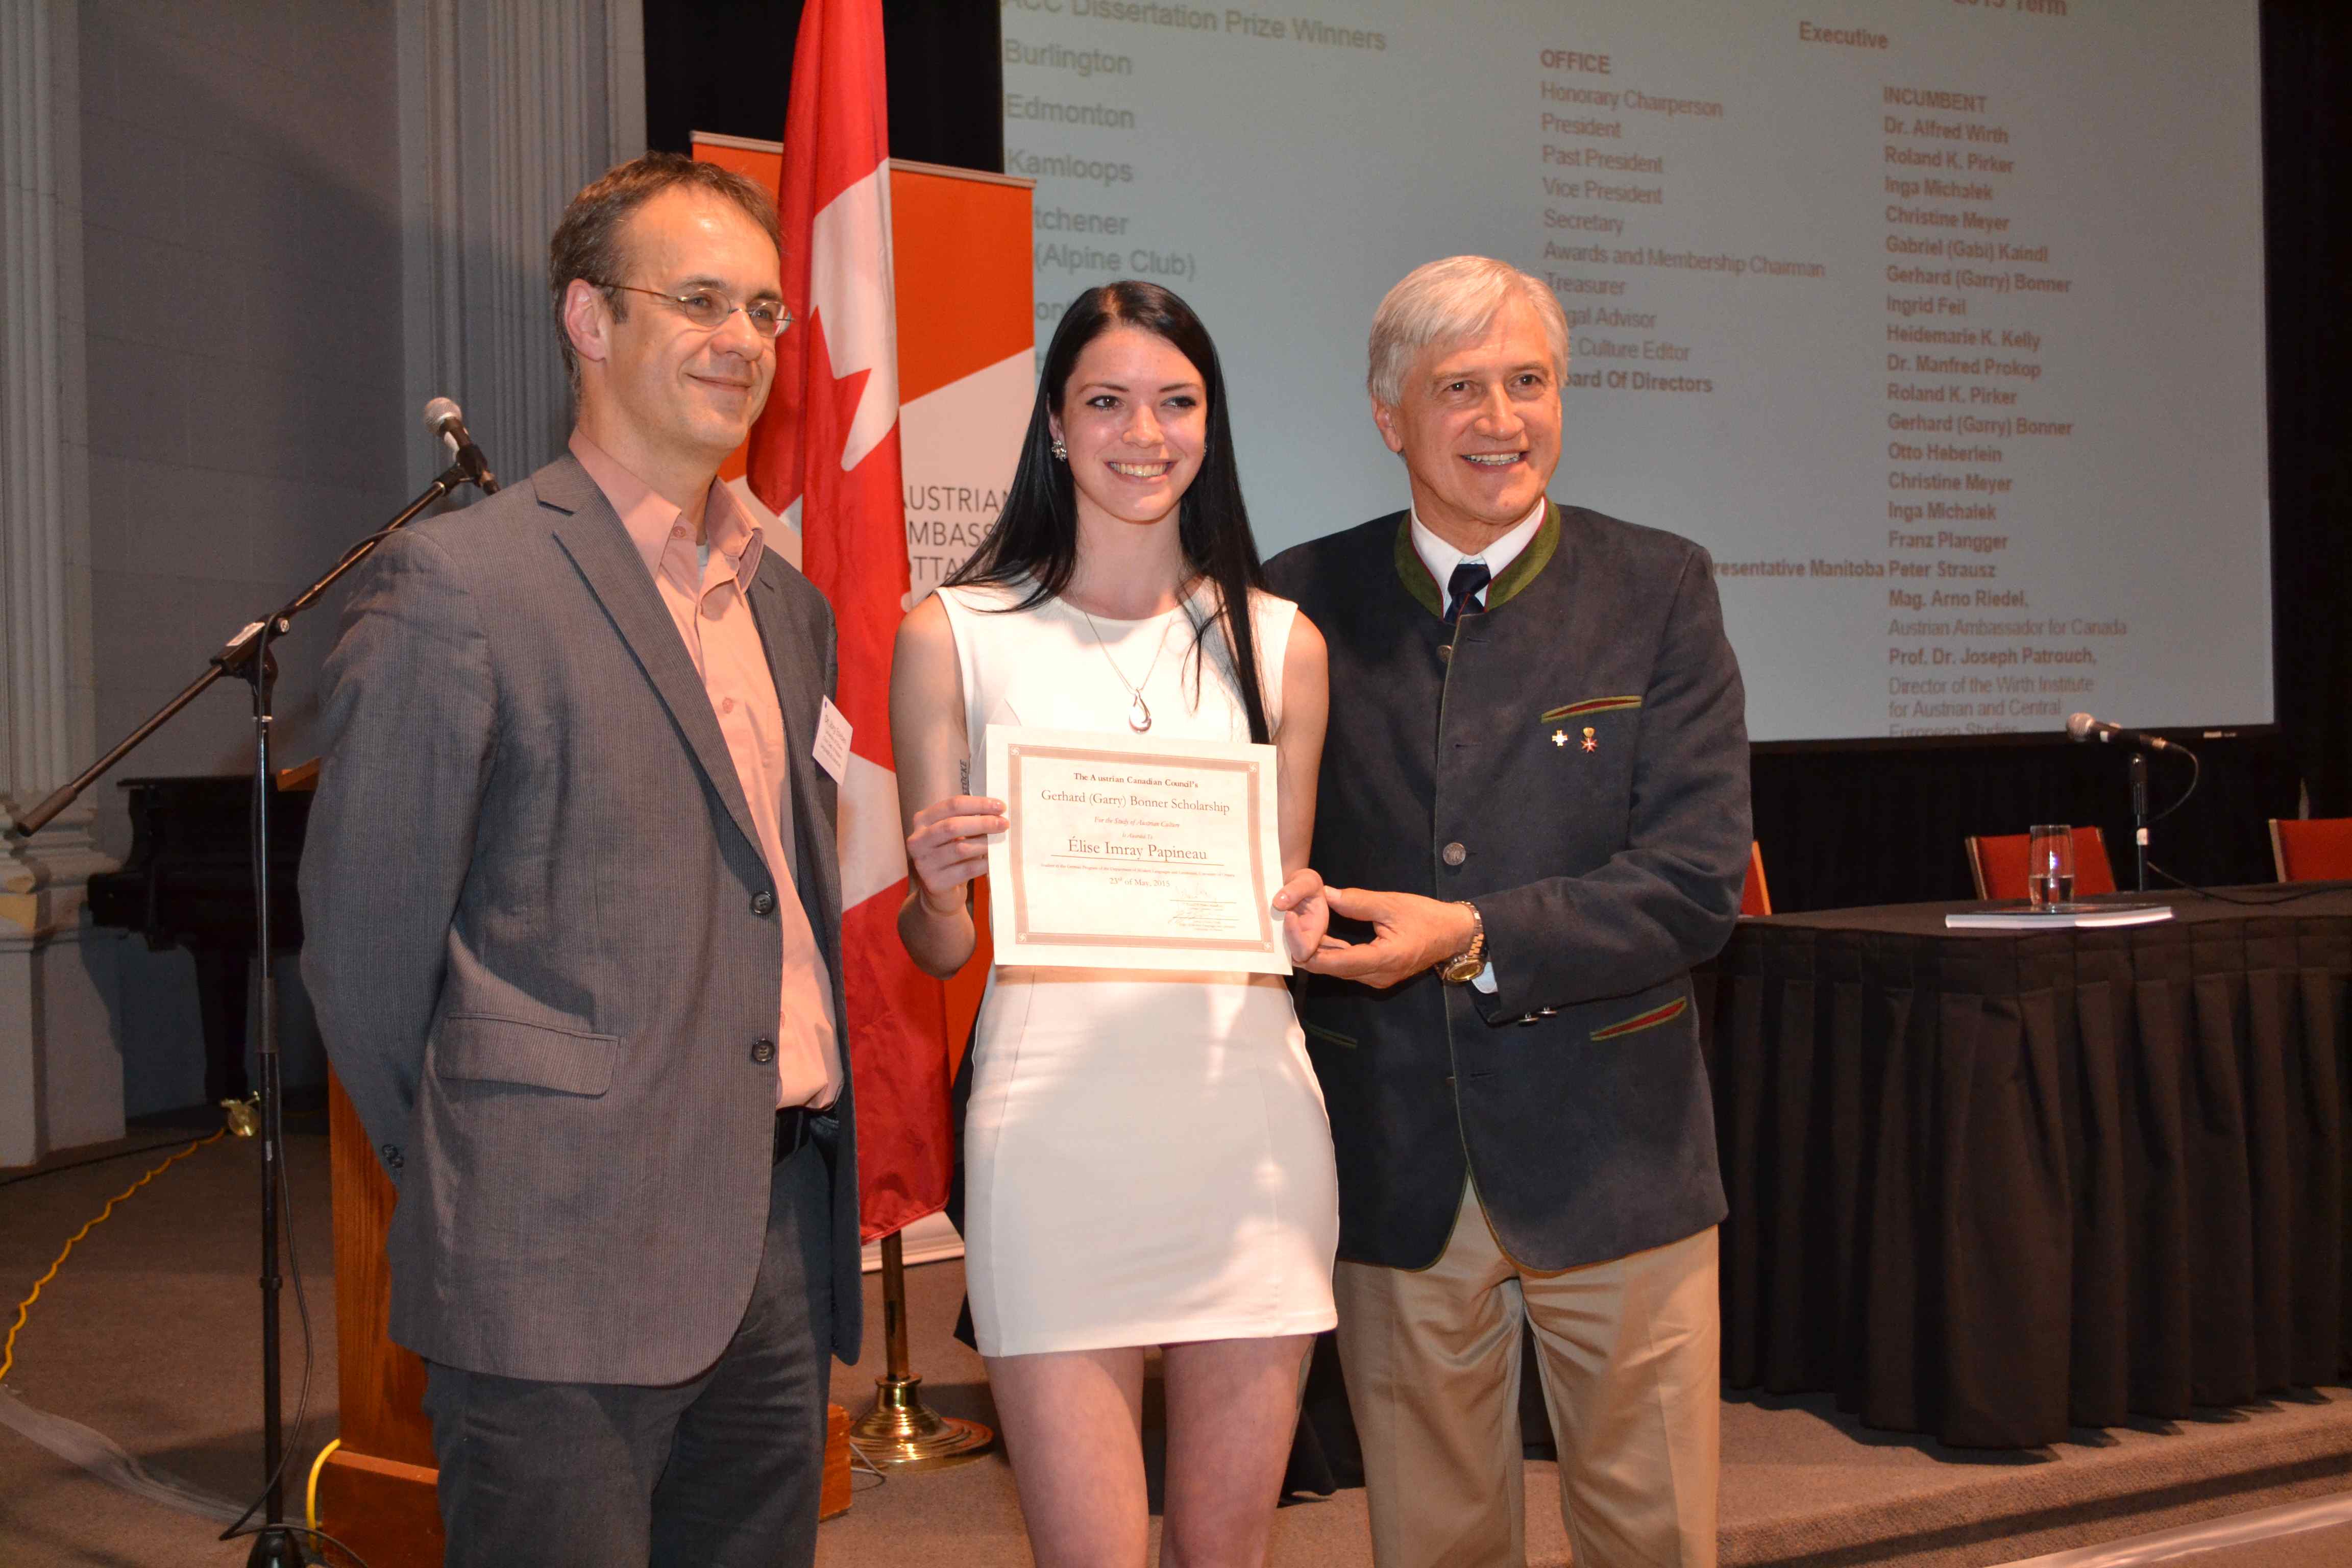 Scholarship winner Elise Papineau surrounded by Dr. Esleben and ACC Pres. Pirker